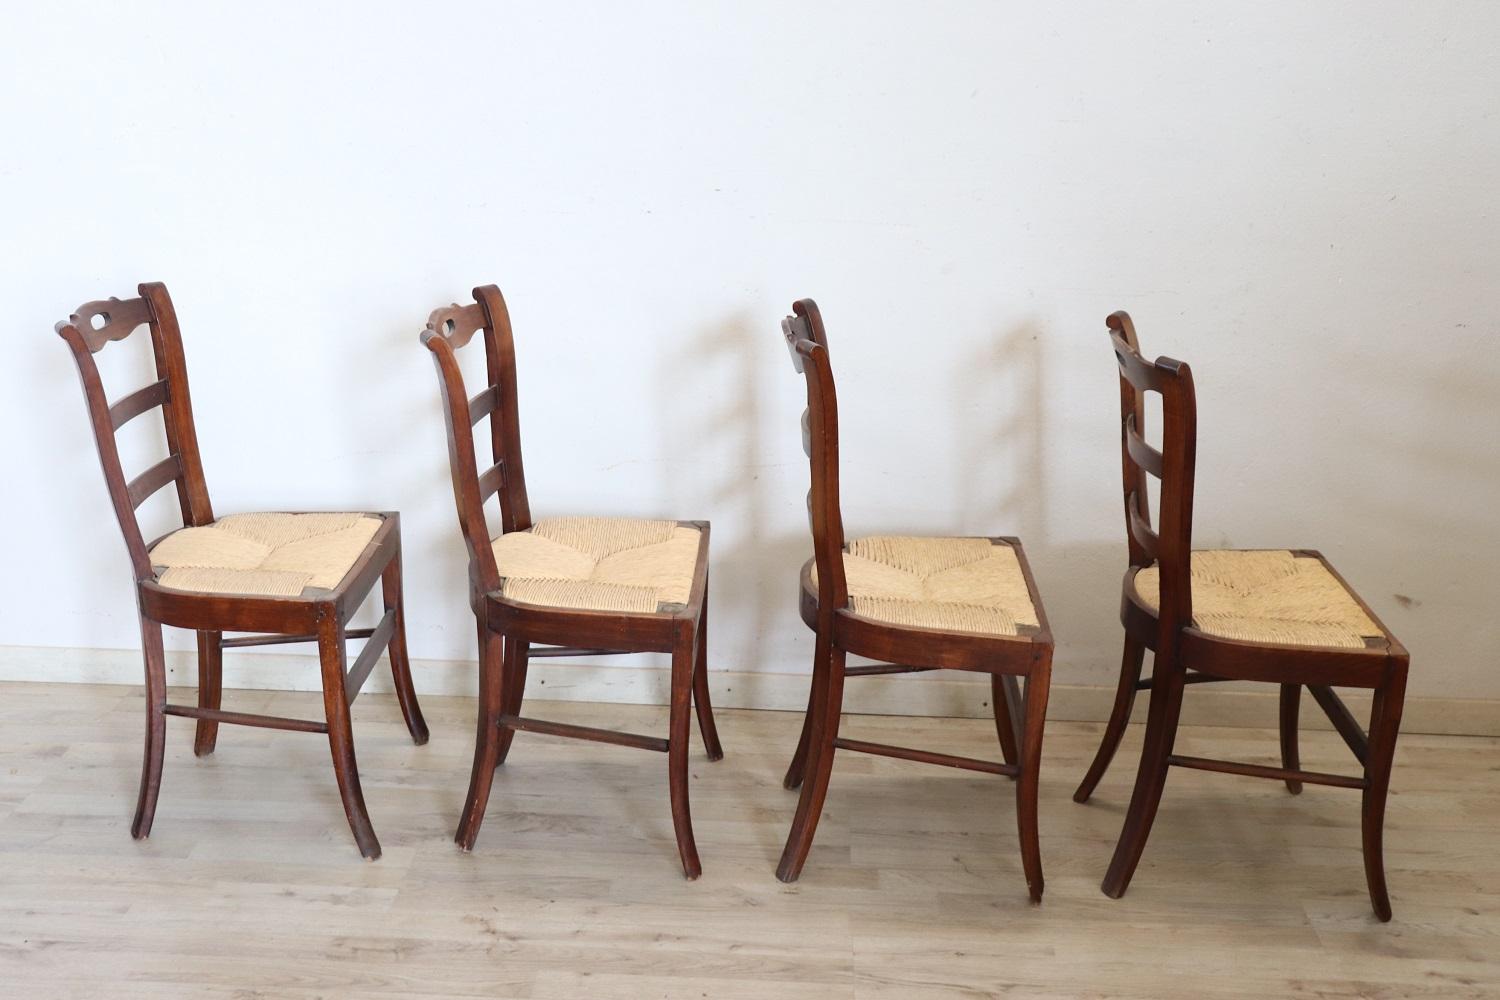 Late 19th Century 19th Century Set of Four Antique Chairs in Cherry Wood with Straw Seat For Sale